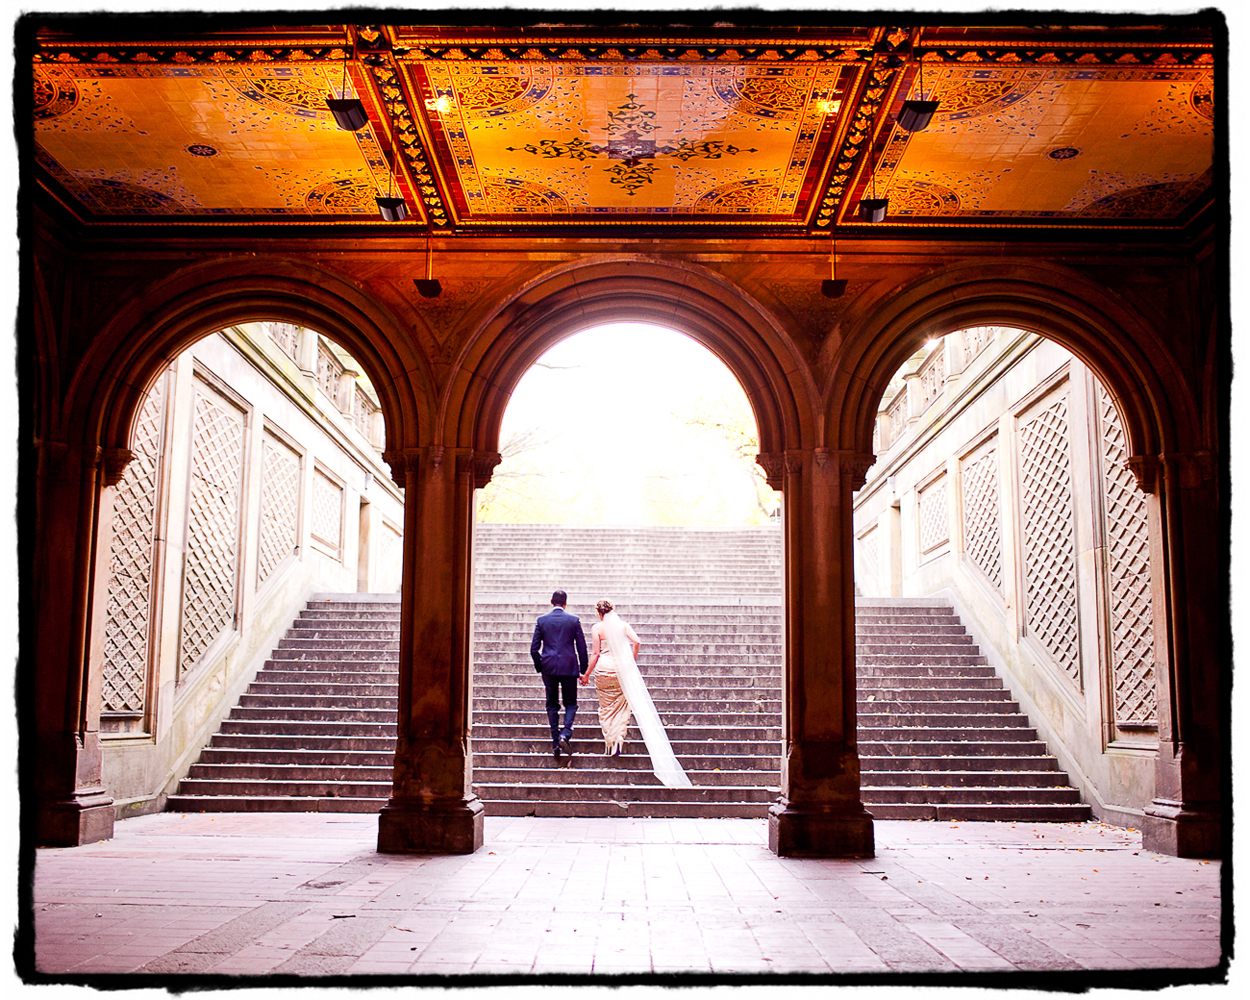 The staircase between the Bethesda Fountain and the Mall at Central Park is a beautiful and iconic spot for a wedding portrait.  I got super lucky with the timing of this mid-afternoon wedding and there was nobody else around when we took this shot.